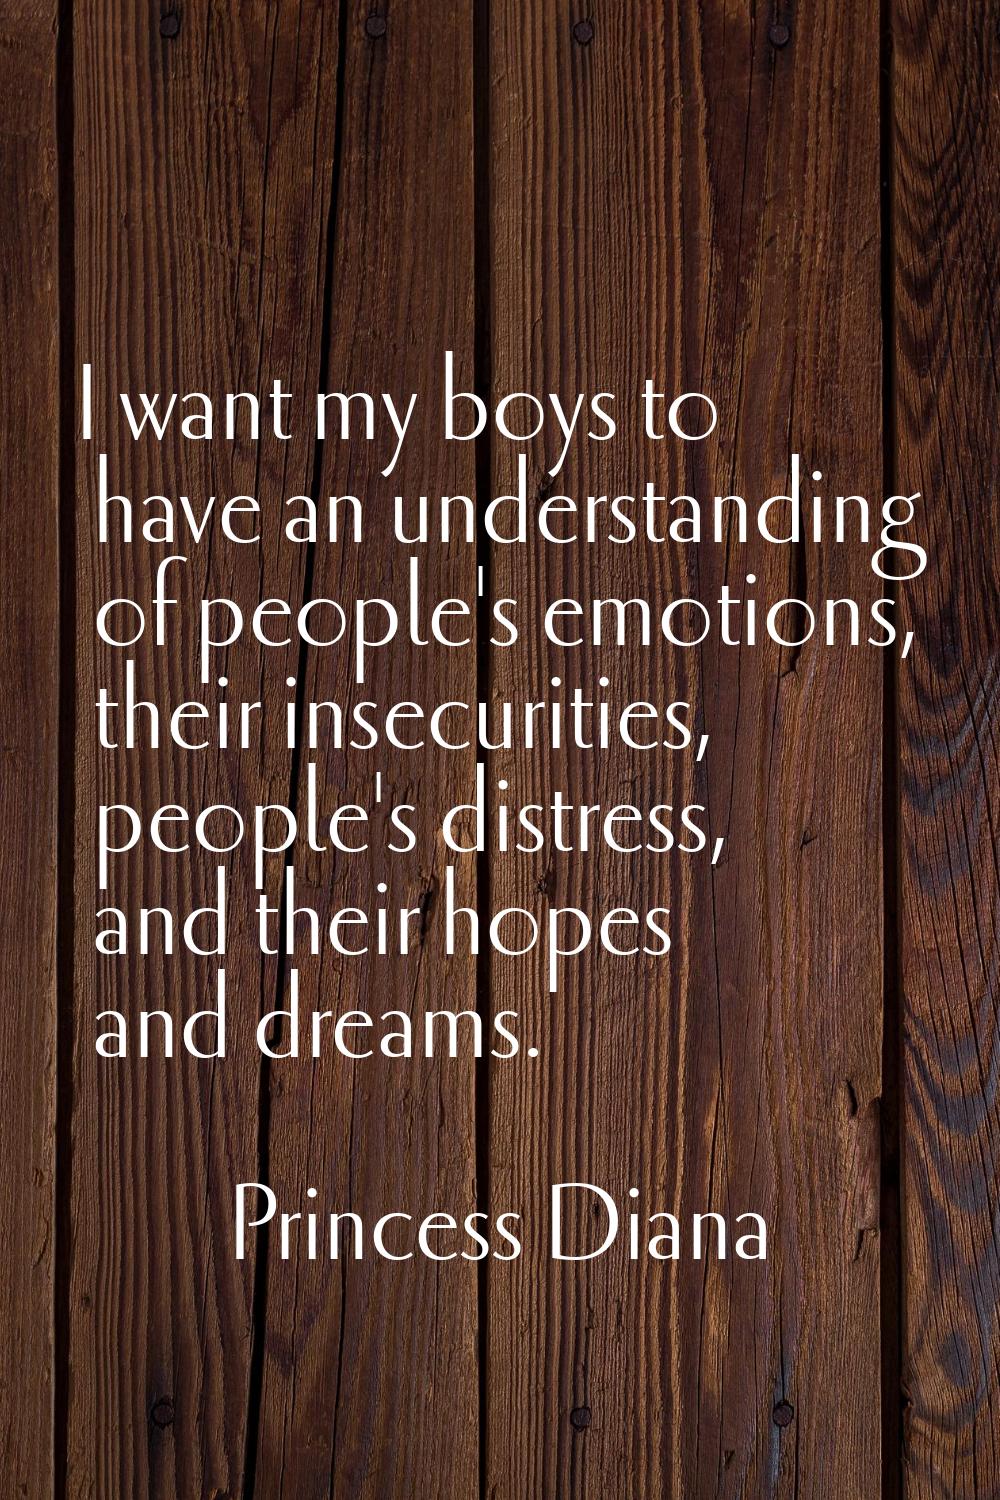 I want my boys to have an understanding of people's emotions, their insecurities, people's distress